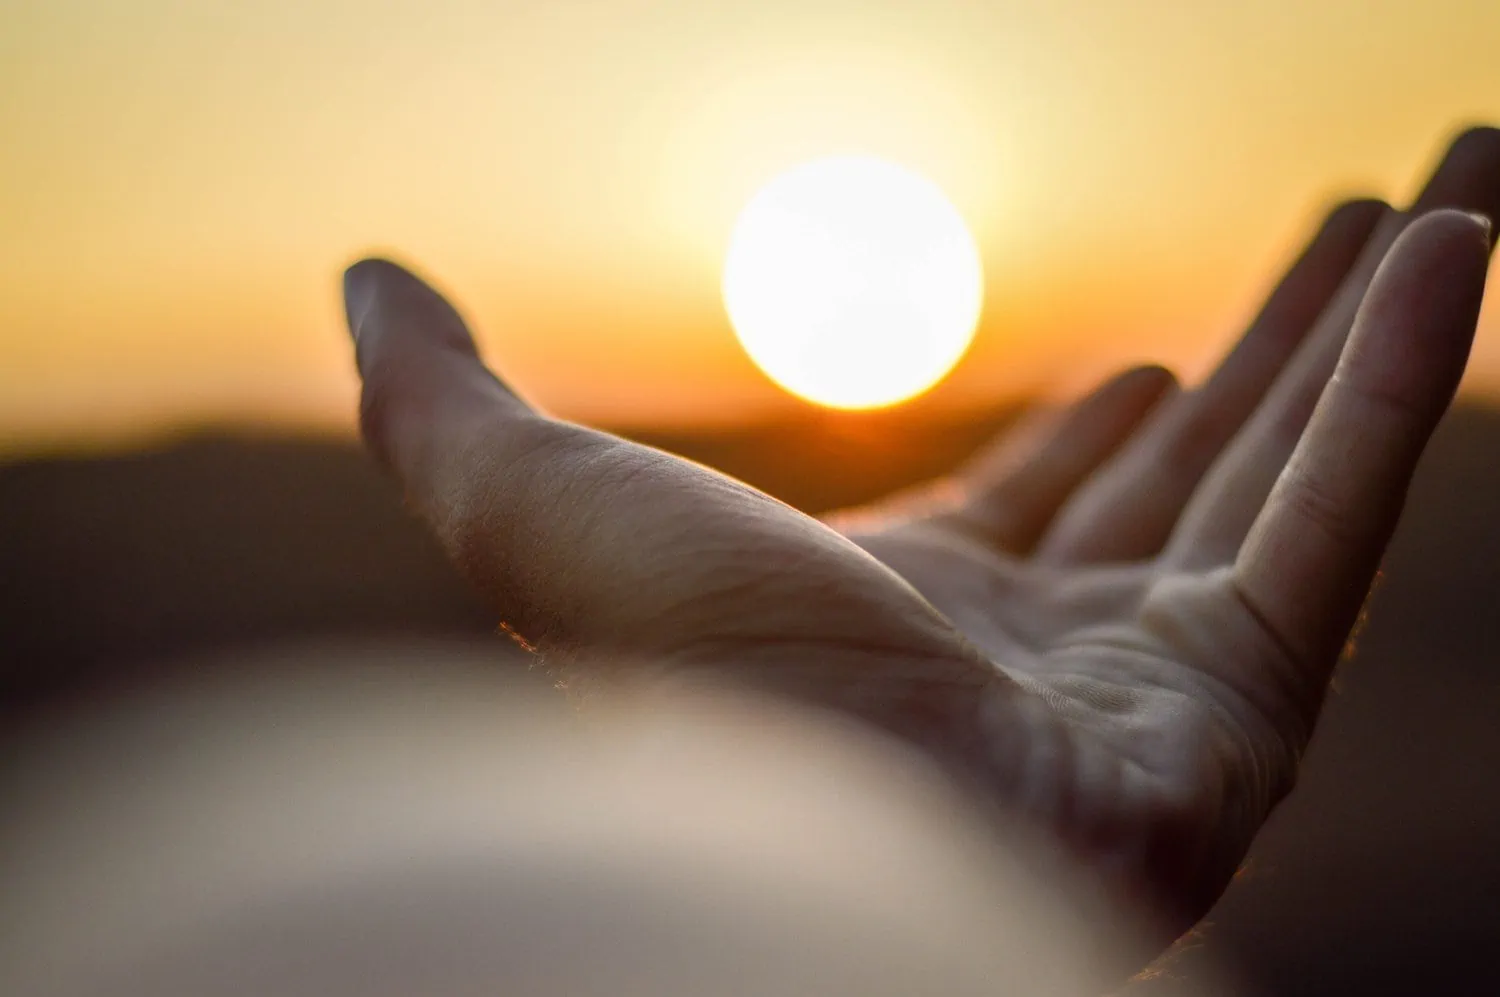 Person reaches for the sun free of worries